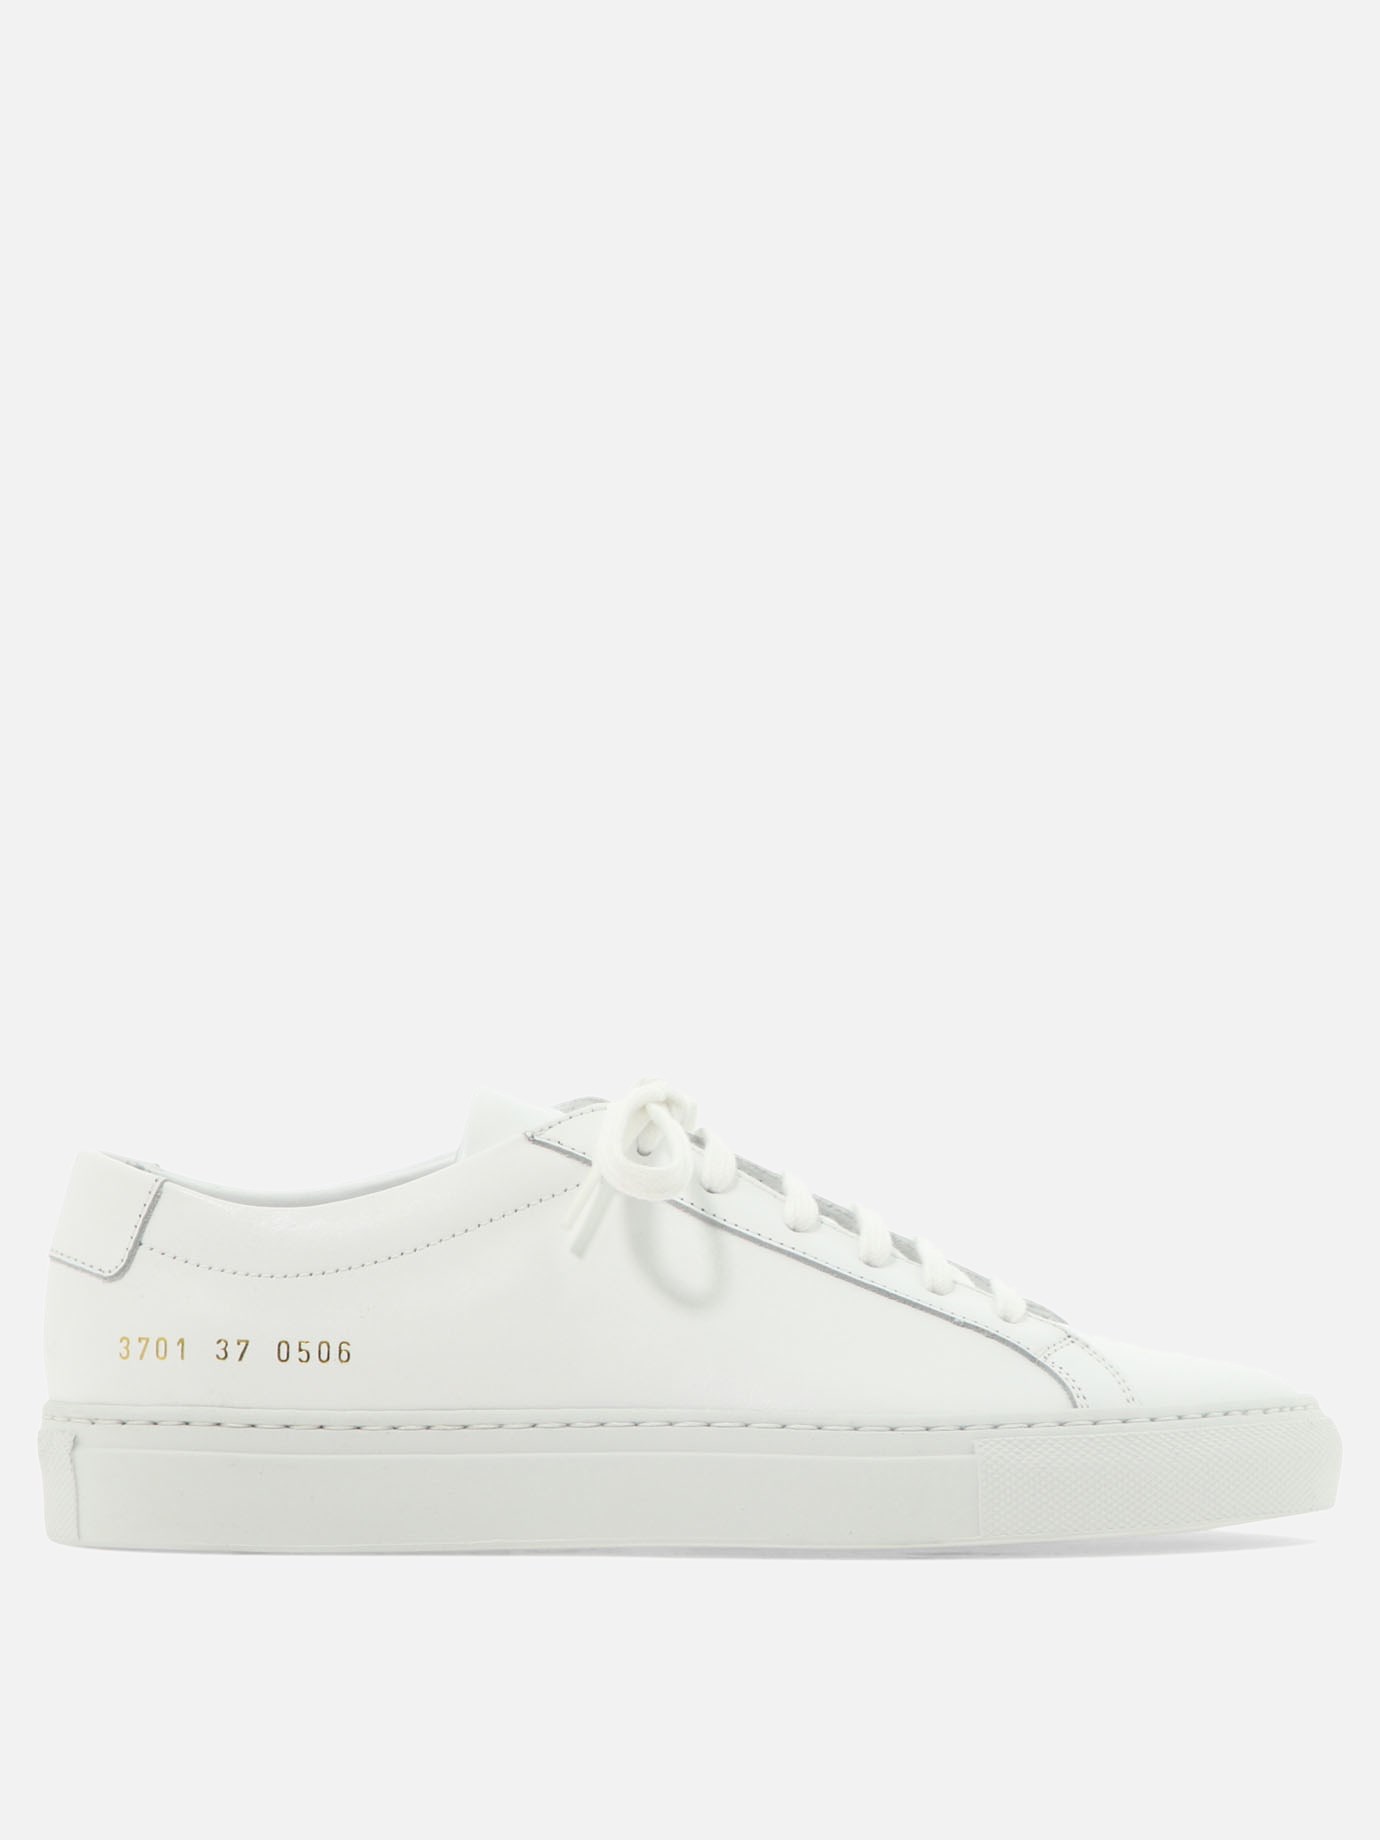 Sneaker  Original Achilles by Common Projects - 1